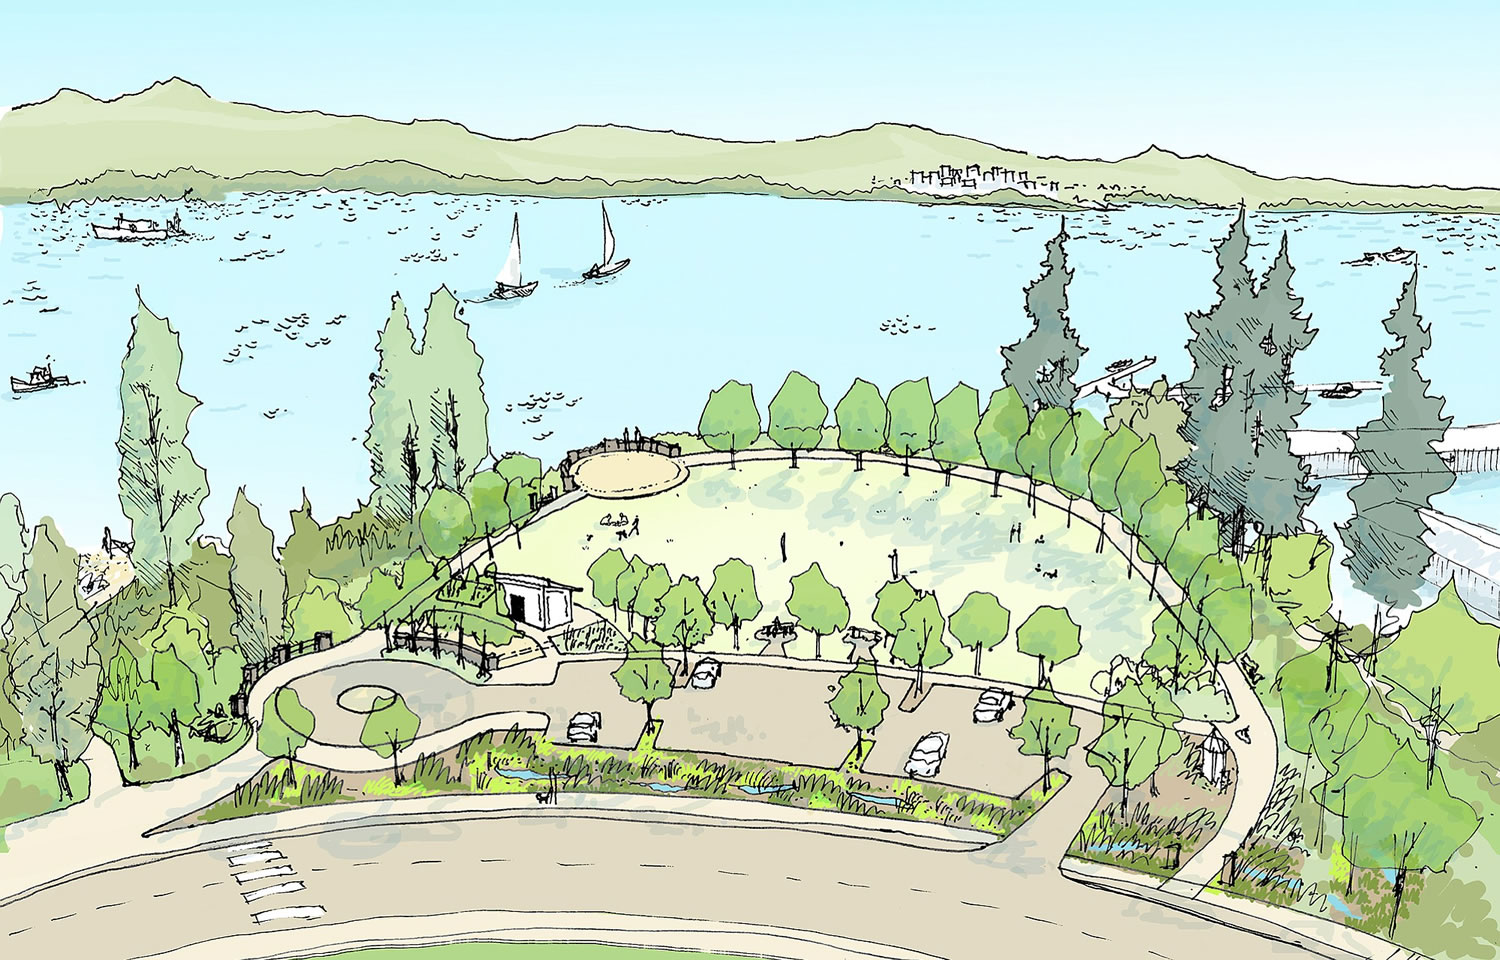 The Port of Camas-Washougal's $6.1 million capital spending plan includes $2.2 million for a new waterfront park and trail.